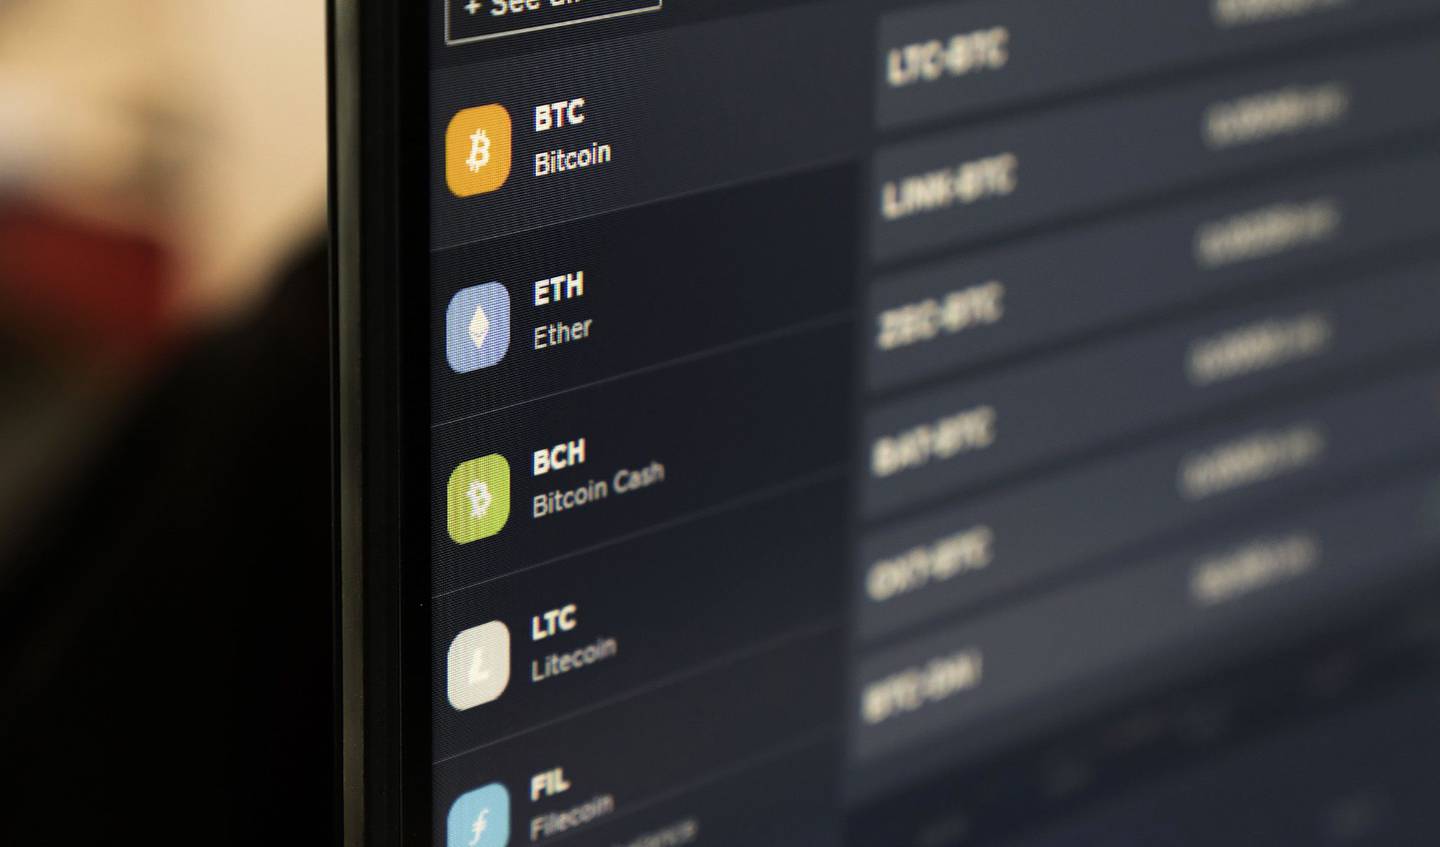 Cryptocurrencies are listed on the Gemini exchange website arranged in Singapore.